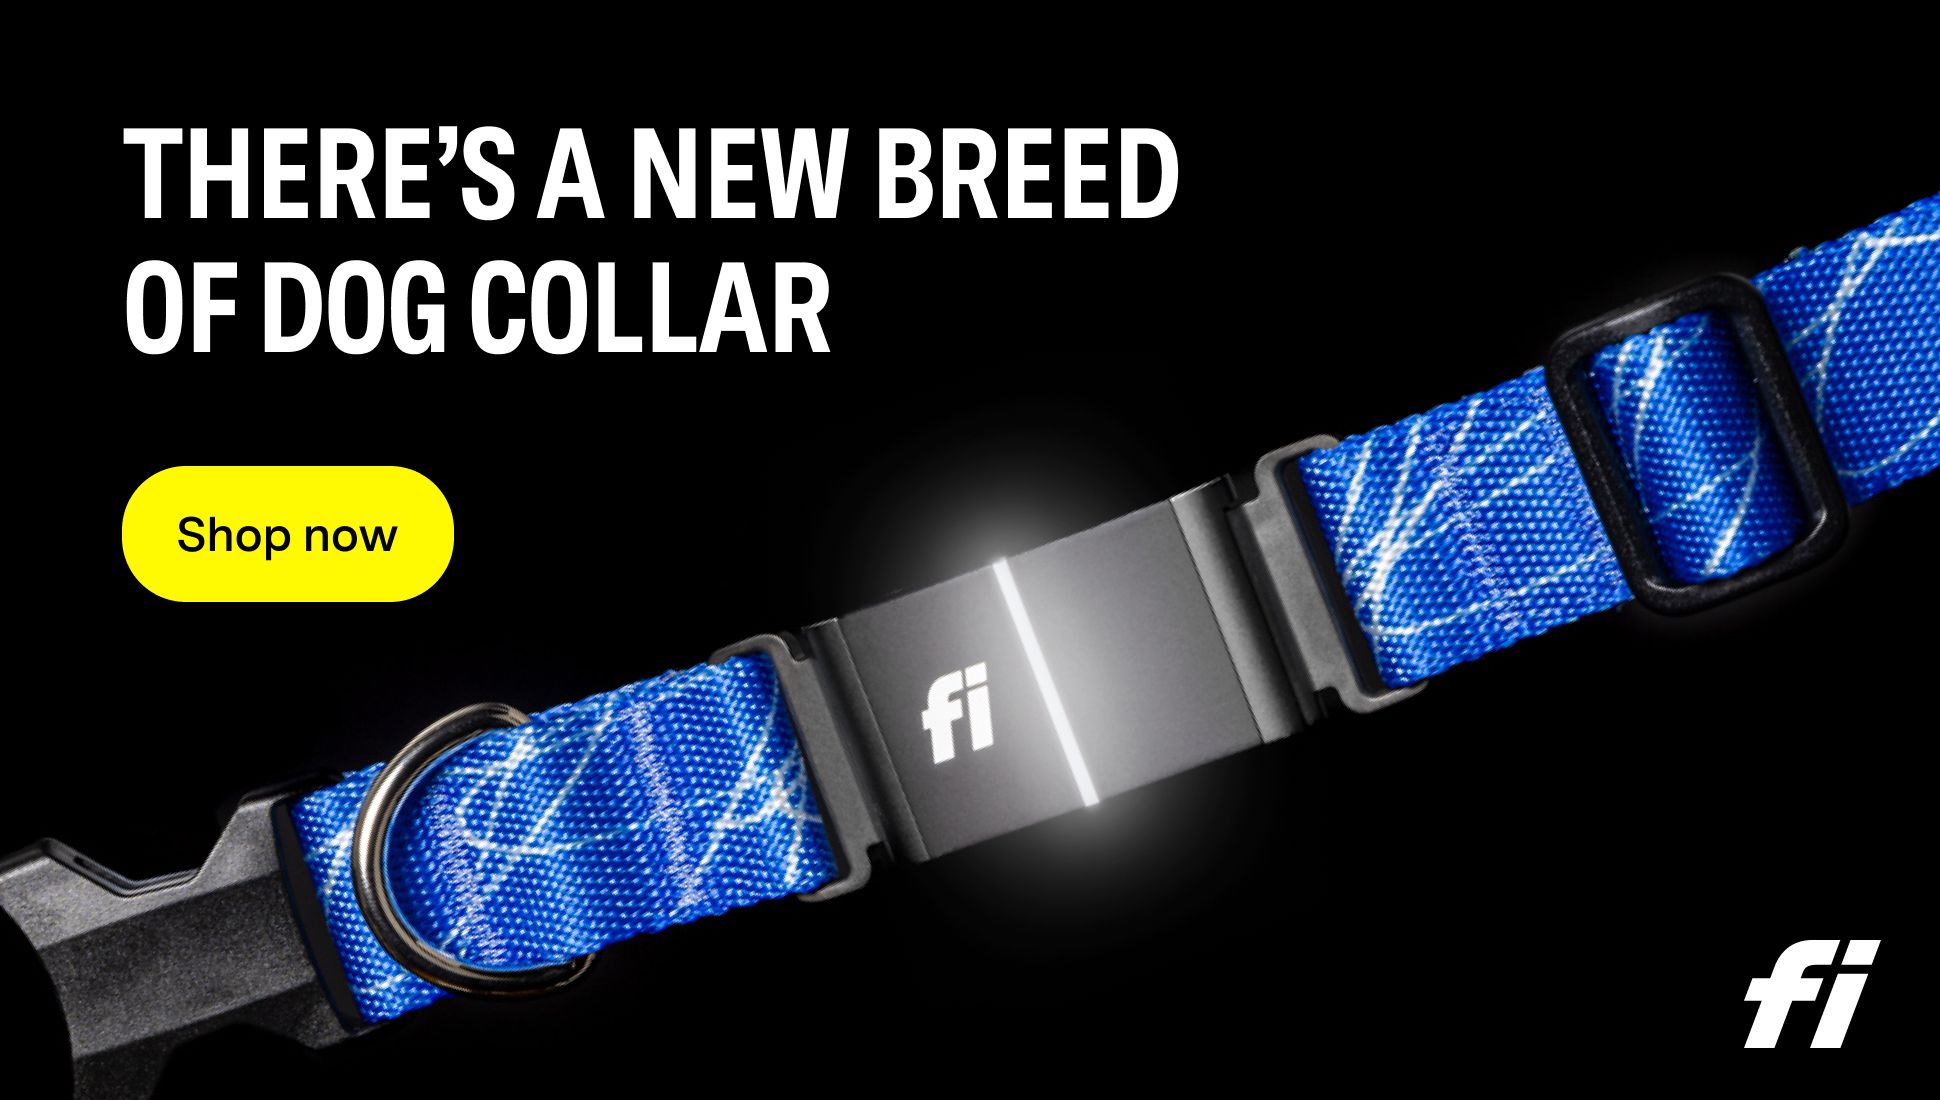 FI Smart Collars for dogs